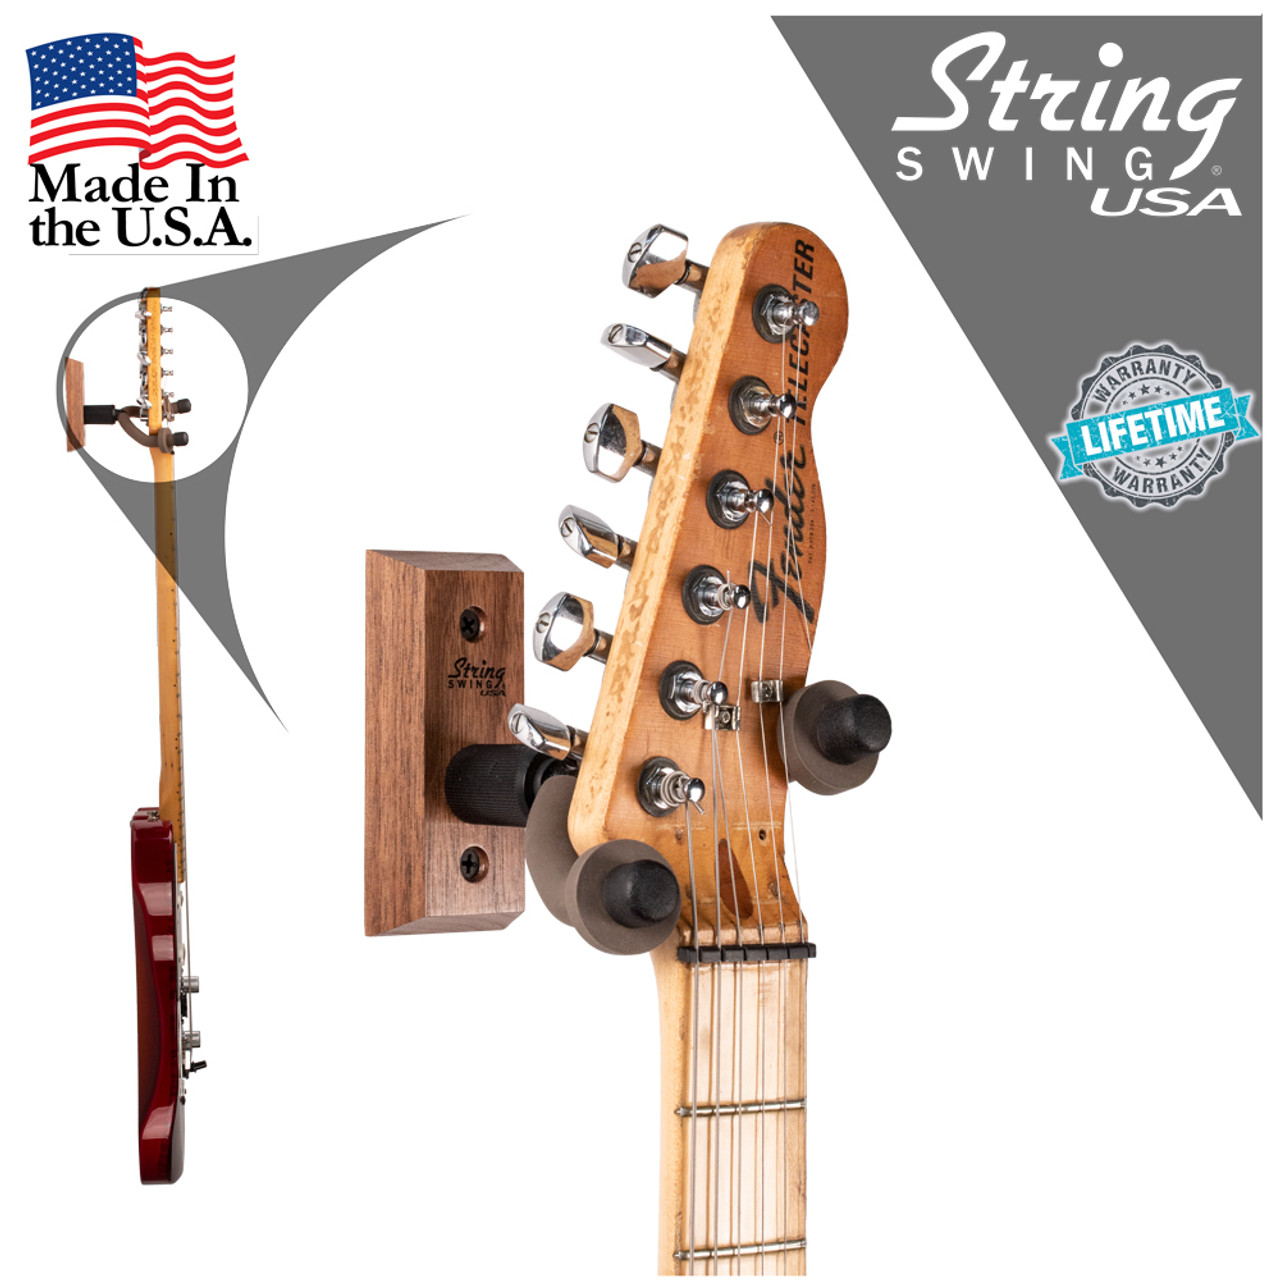  String Swing Guitar Stand, Multi Guitar Rack for Acoustic,  Electric, Bass Guitars, Hand Welded Steel & Oak Hardwood, Padded Guitar  Holders, Guitar Stands Floor - USA Made : Musical Instruments